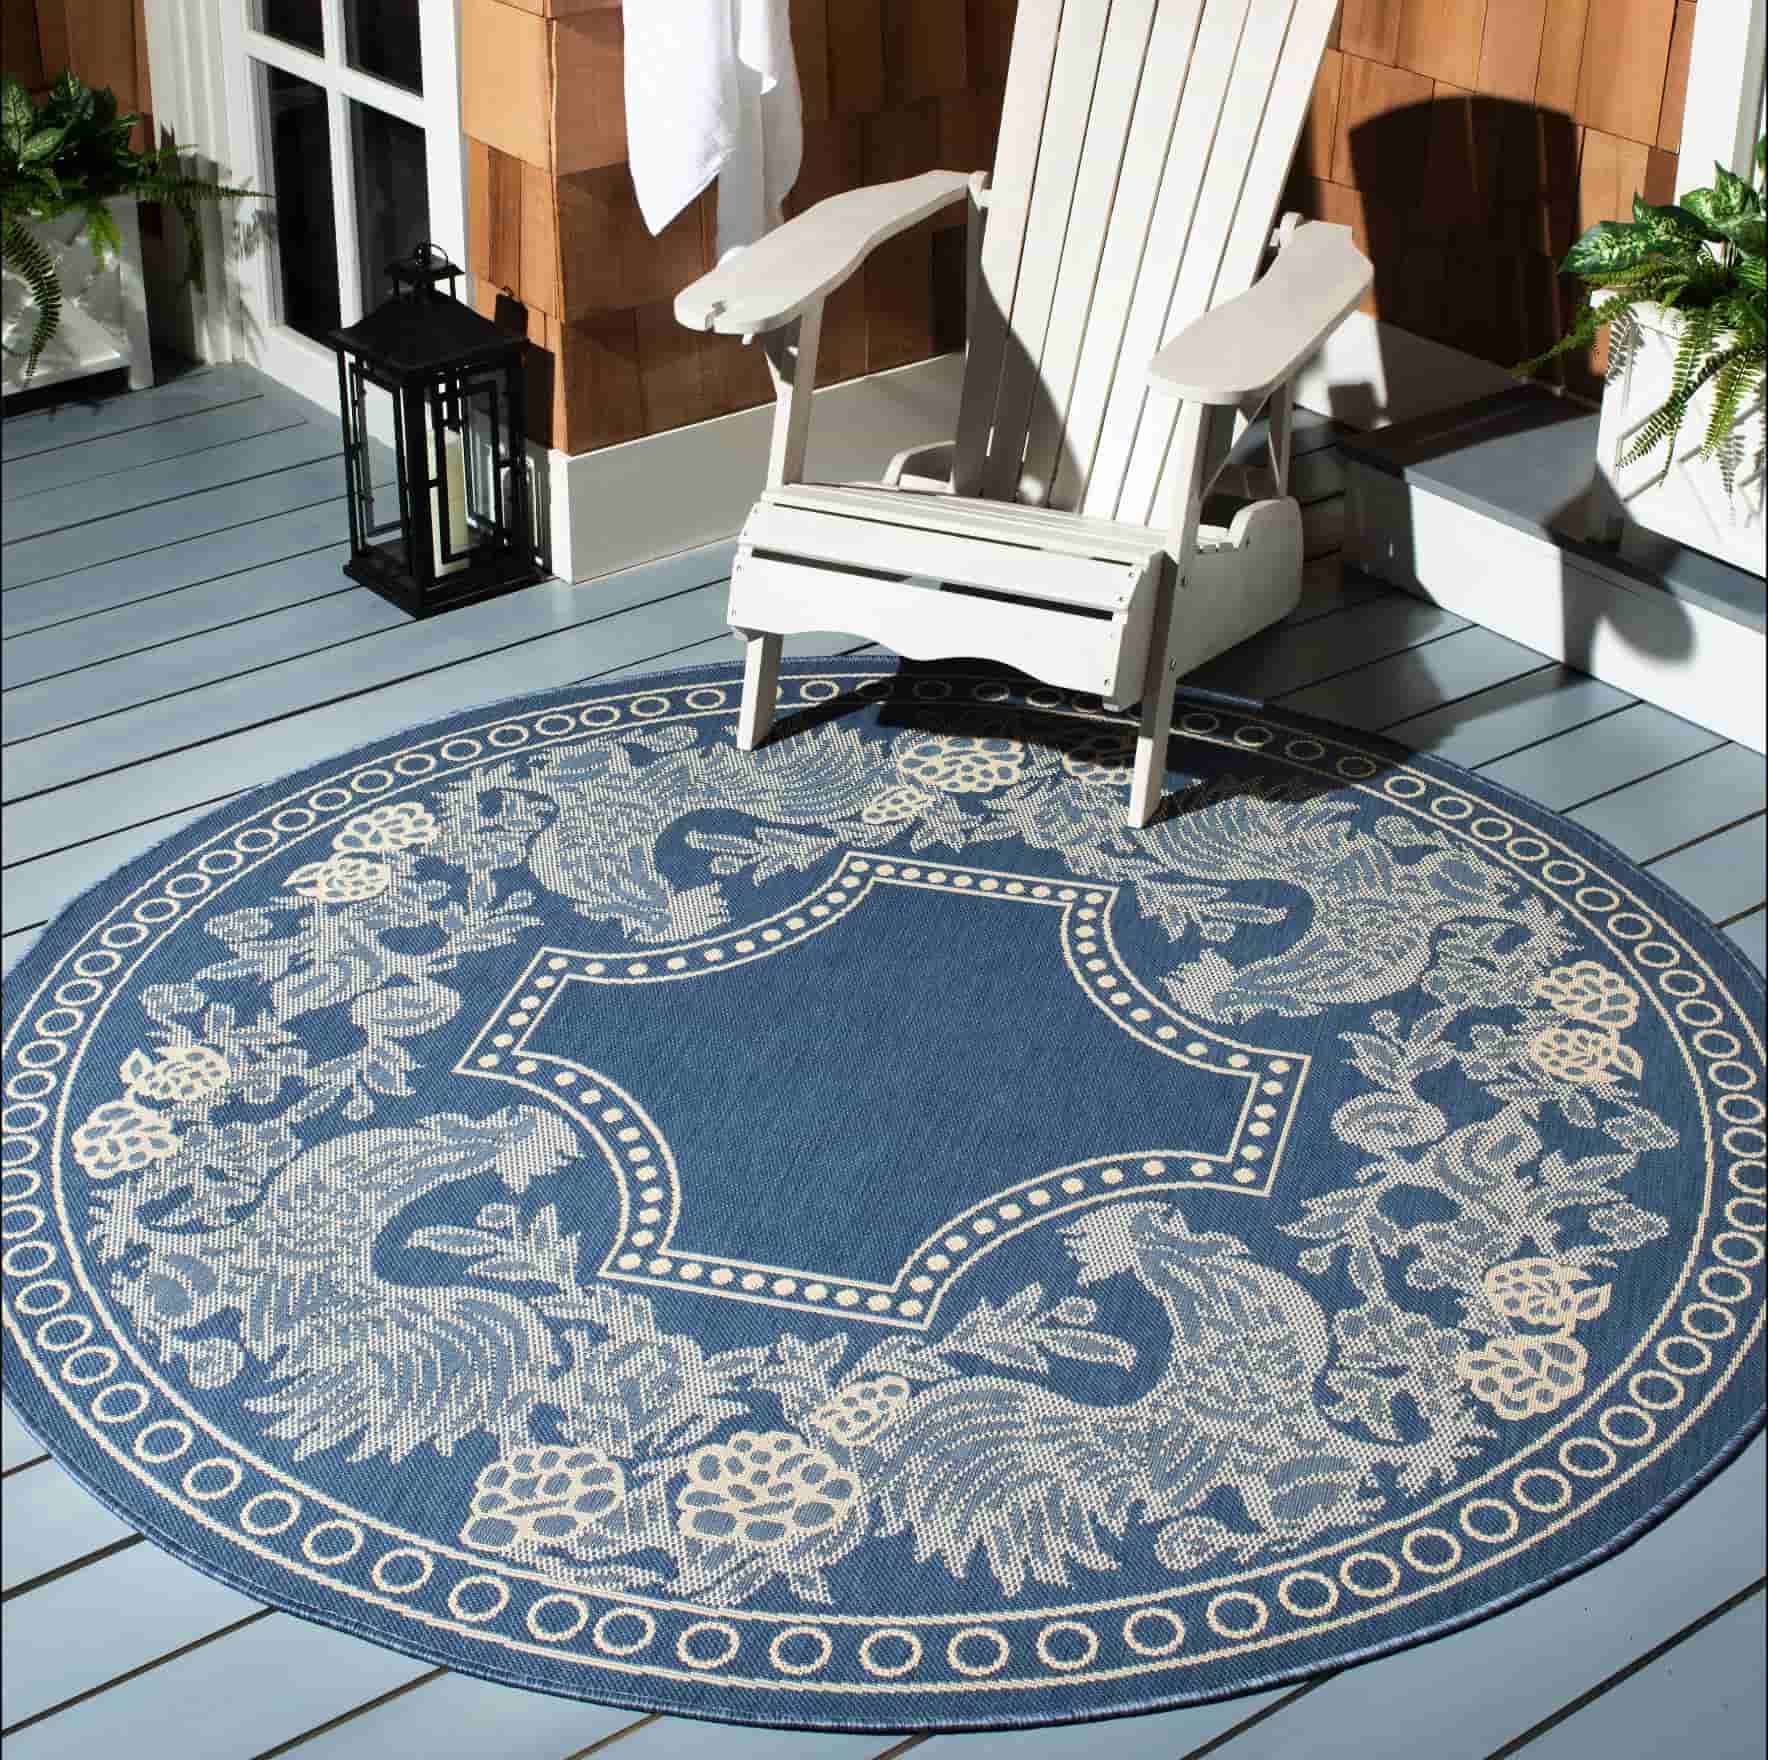 round rugs with royal prints, reclining chair placed on it, blue coloured carpet with prints, outdoor rugs for decks